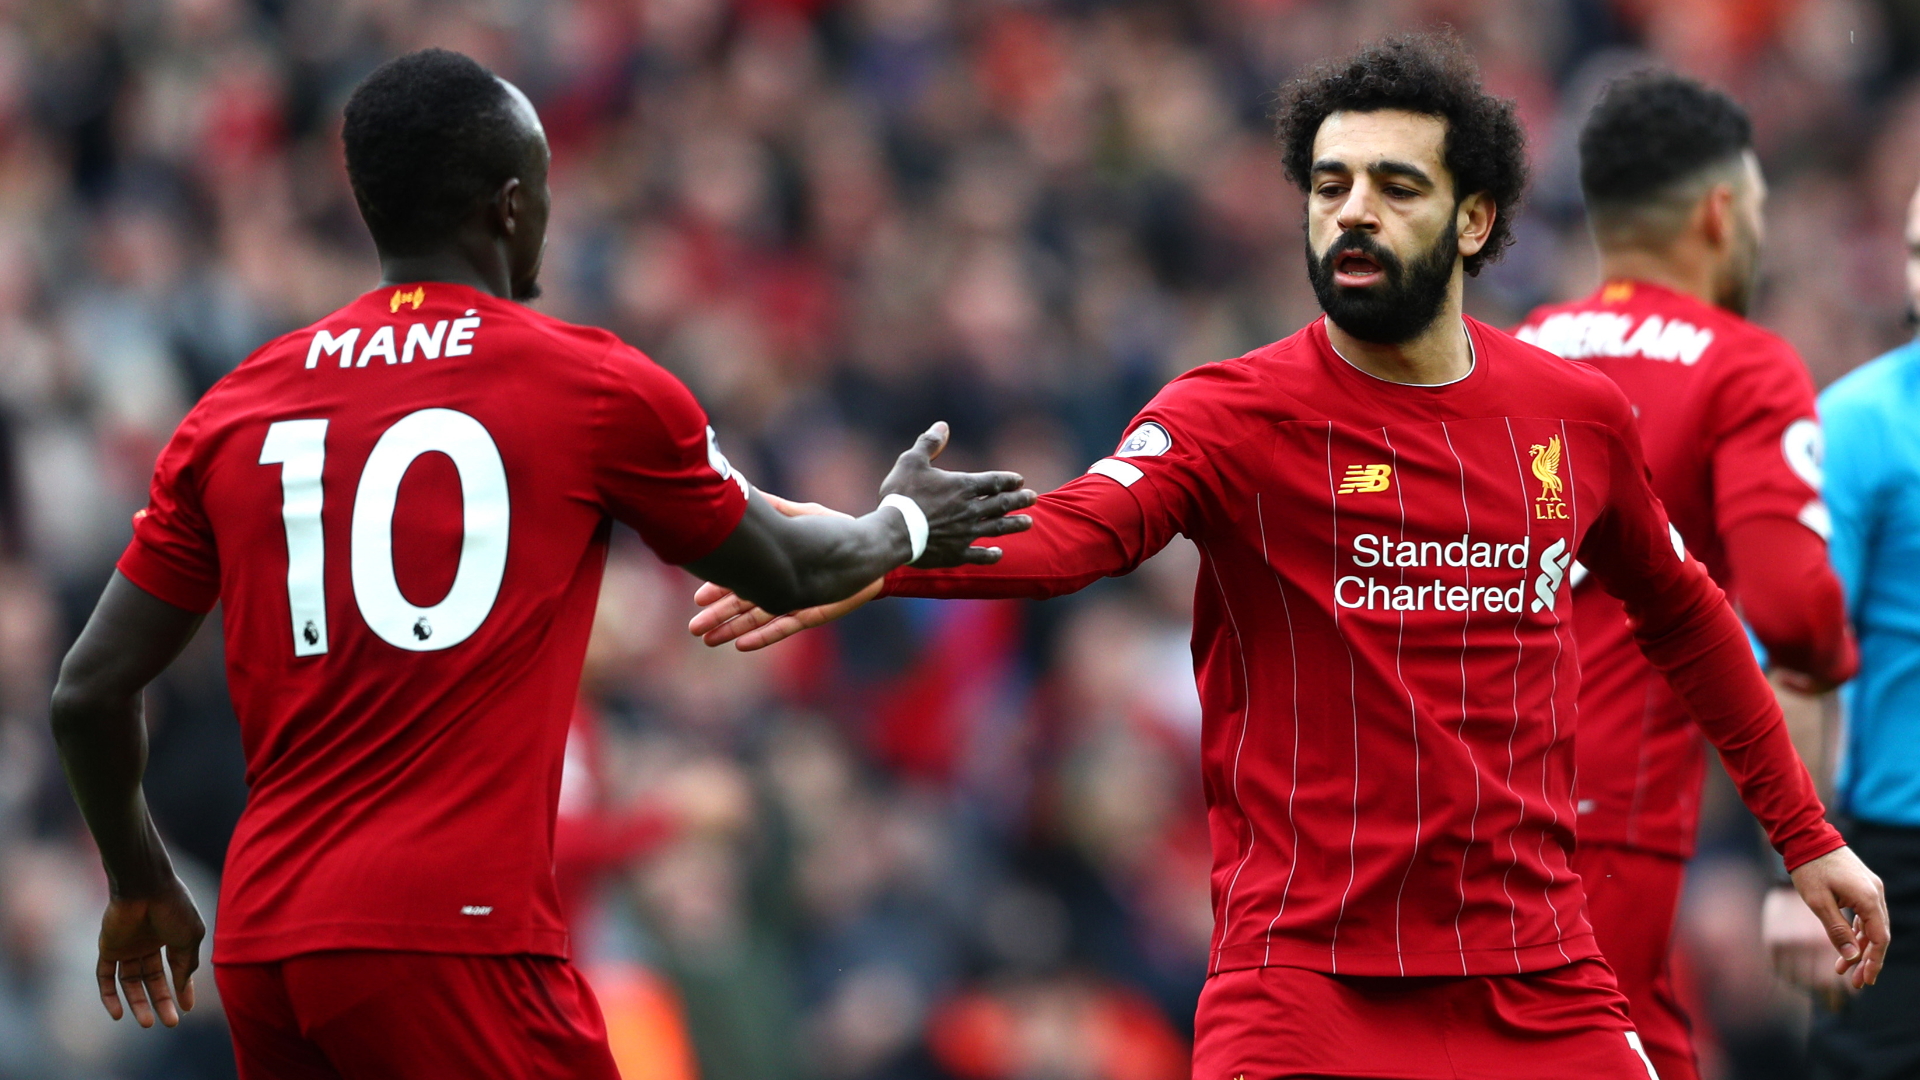 Liverpool set to smash Premier League record that can likely never be beaten - Bóng Đá